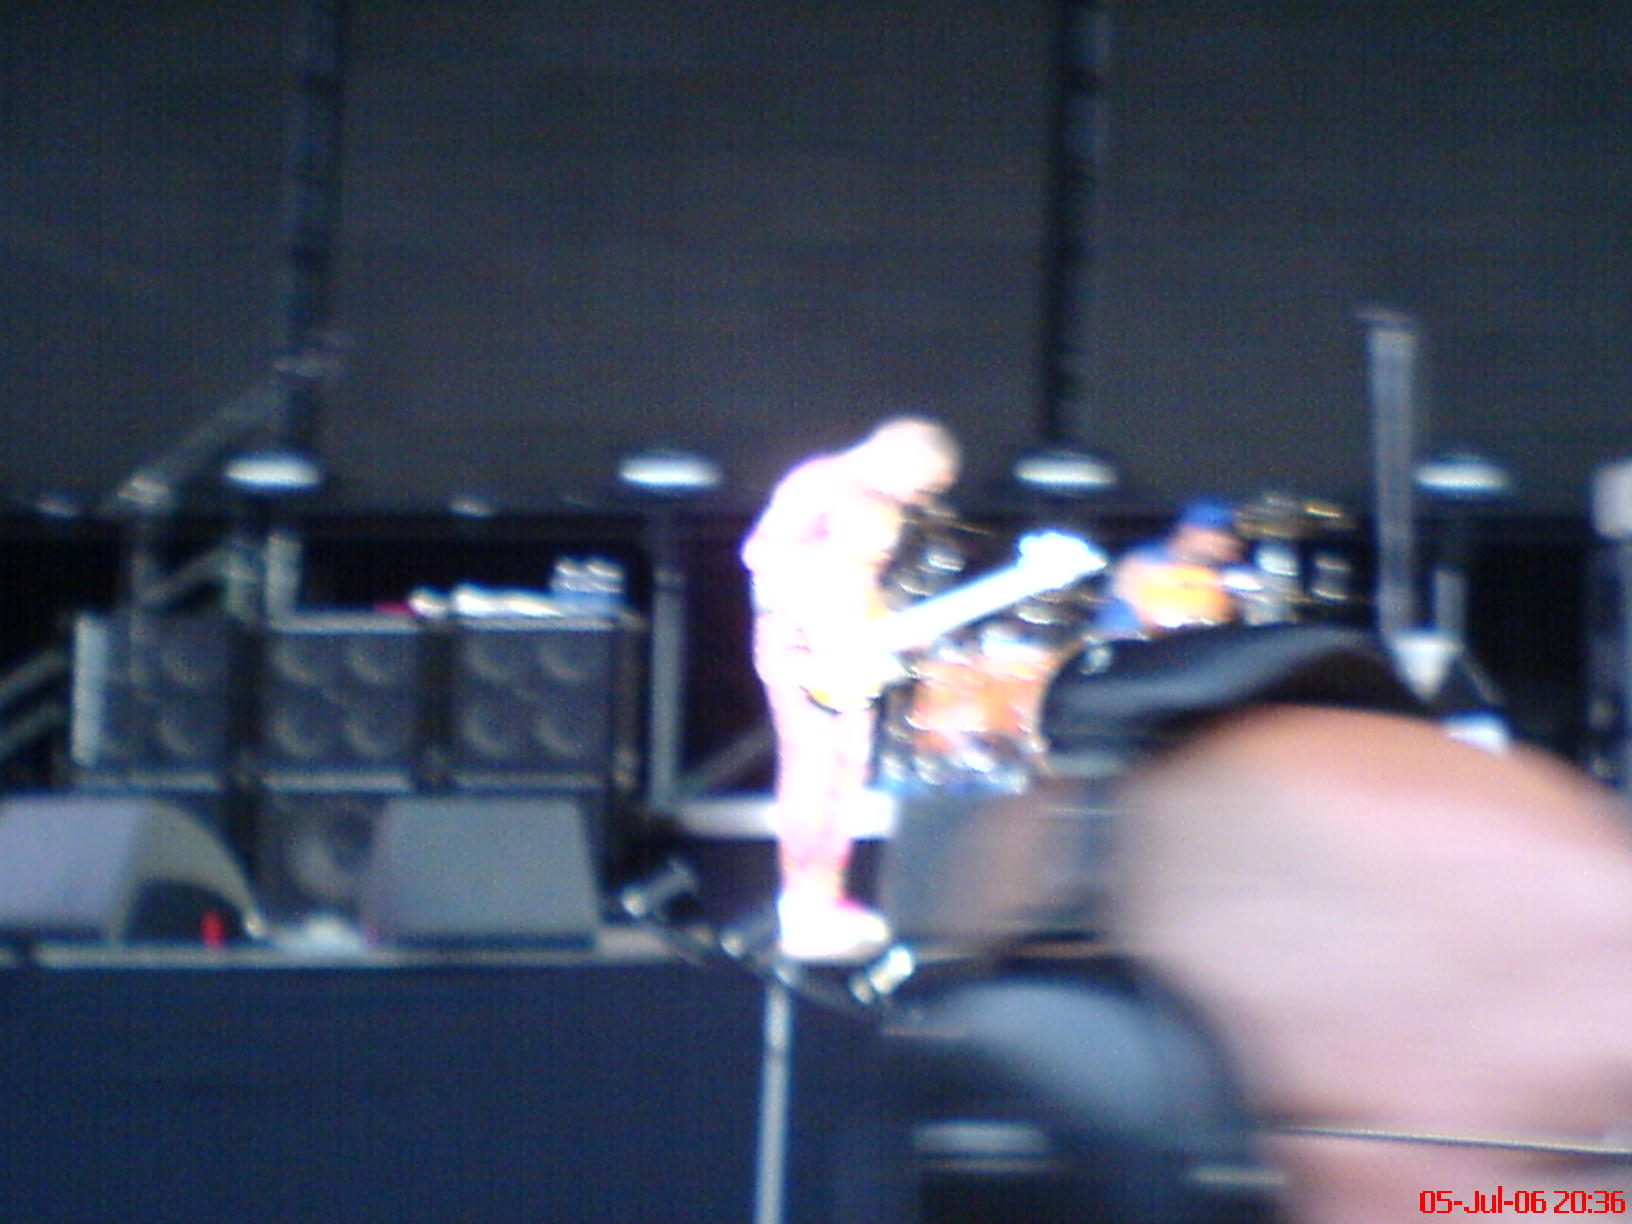 a blurry image of some band on stage